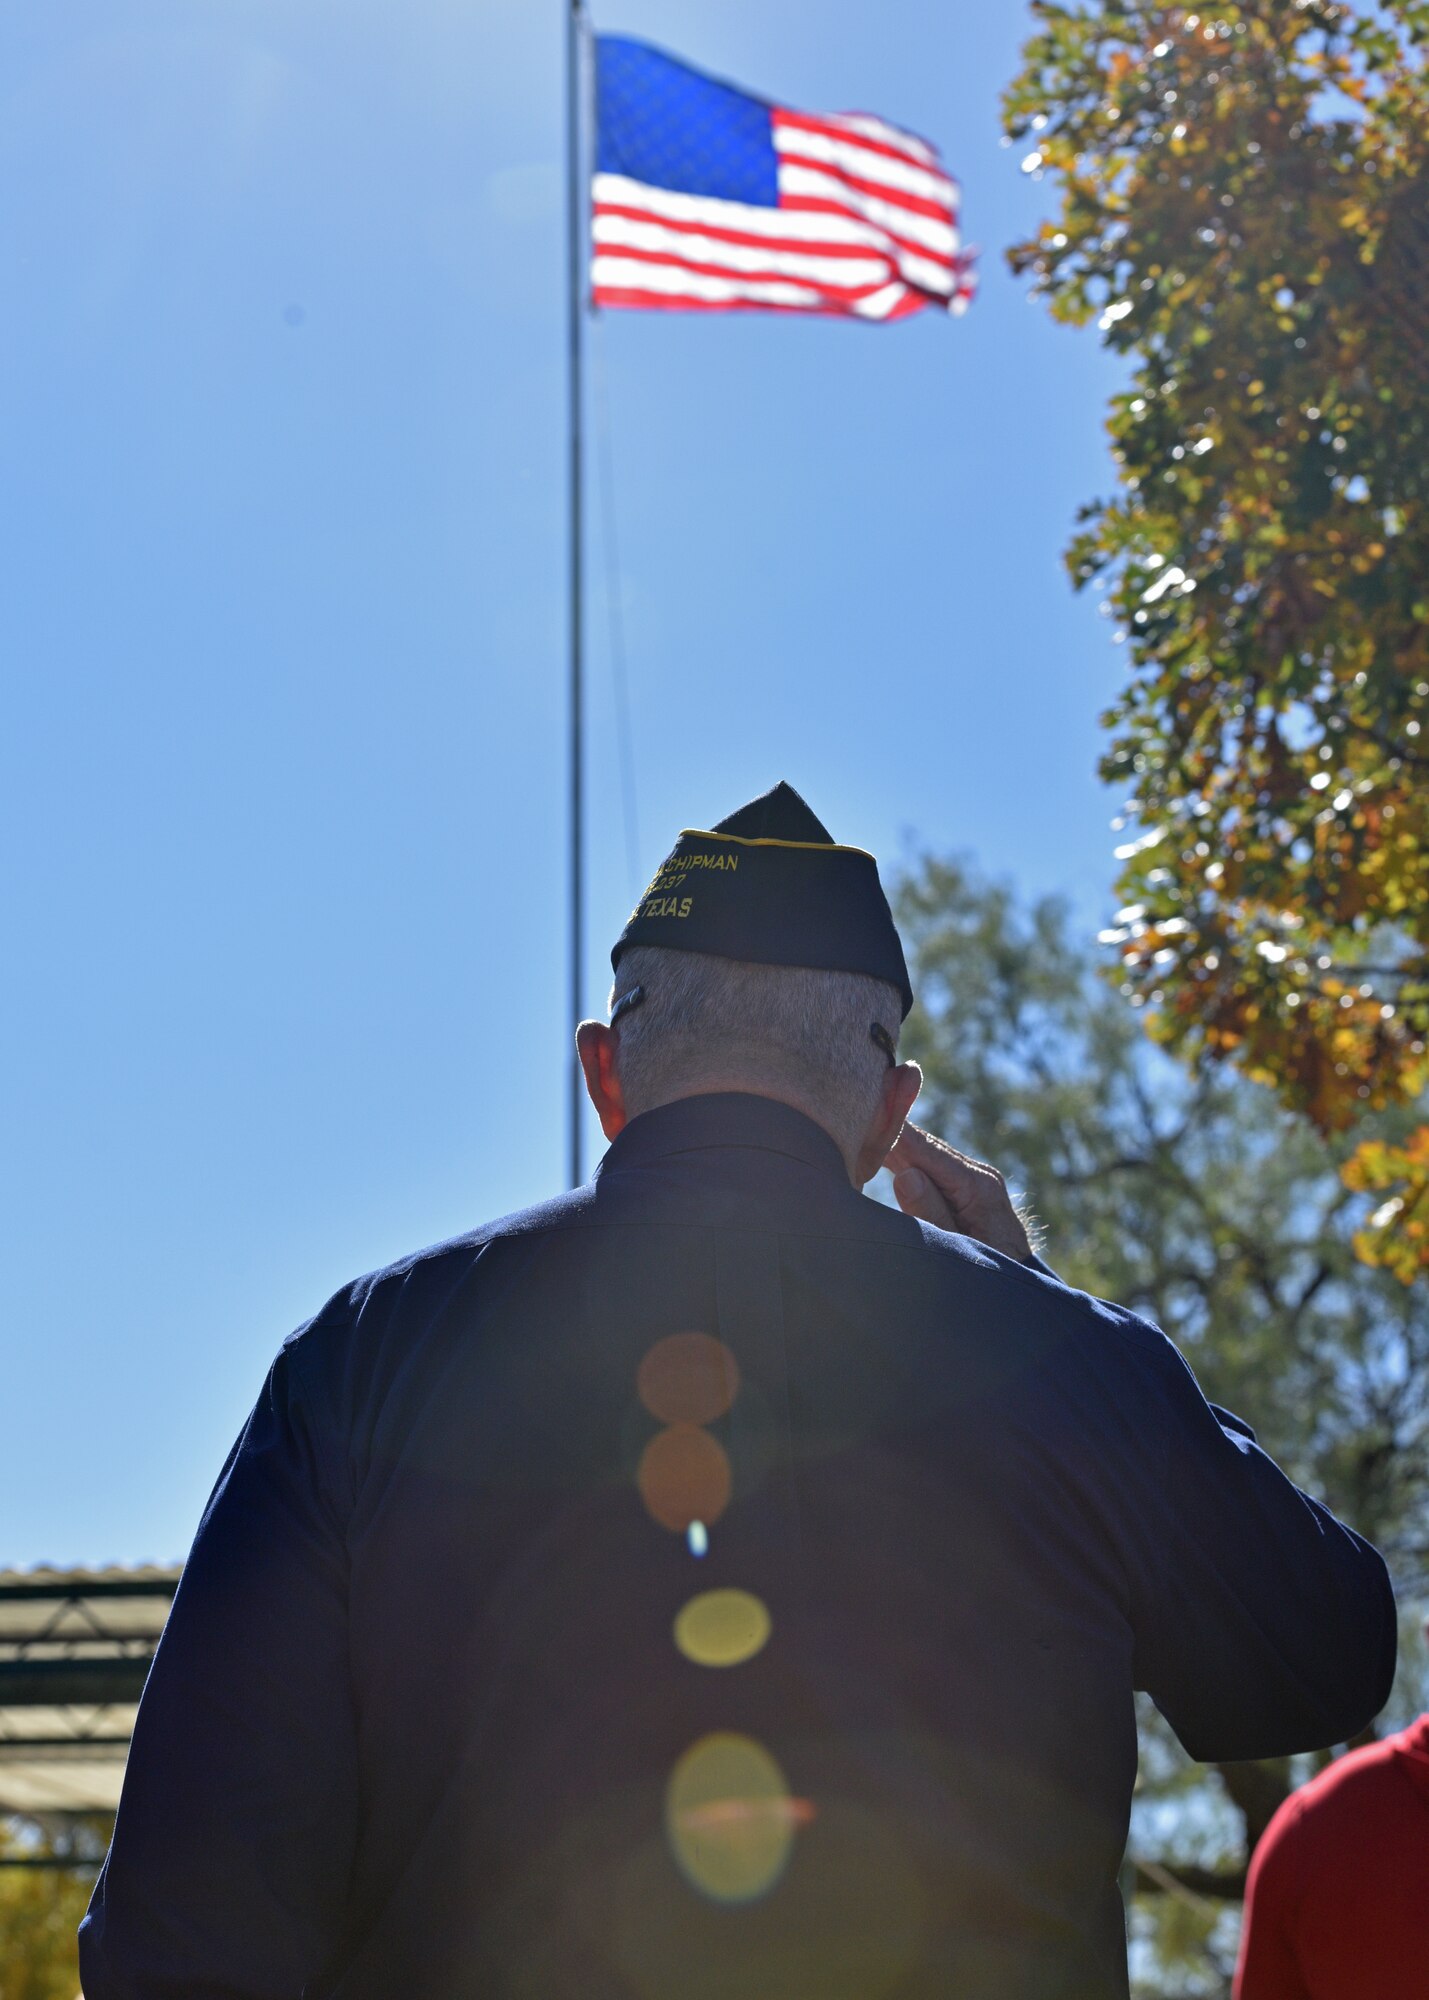 A local Veteran salutes during the playing of ‘Taps’ during the Veterans Day ceremony at the Fairmount Cemetery in San Angelo, Texas, Nov. 11. Veterans Day celebrates all those who served in service of their nation. (U.S. Air Force photo by Senior Airman Ashley Thrash)